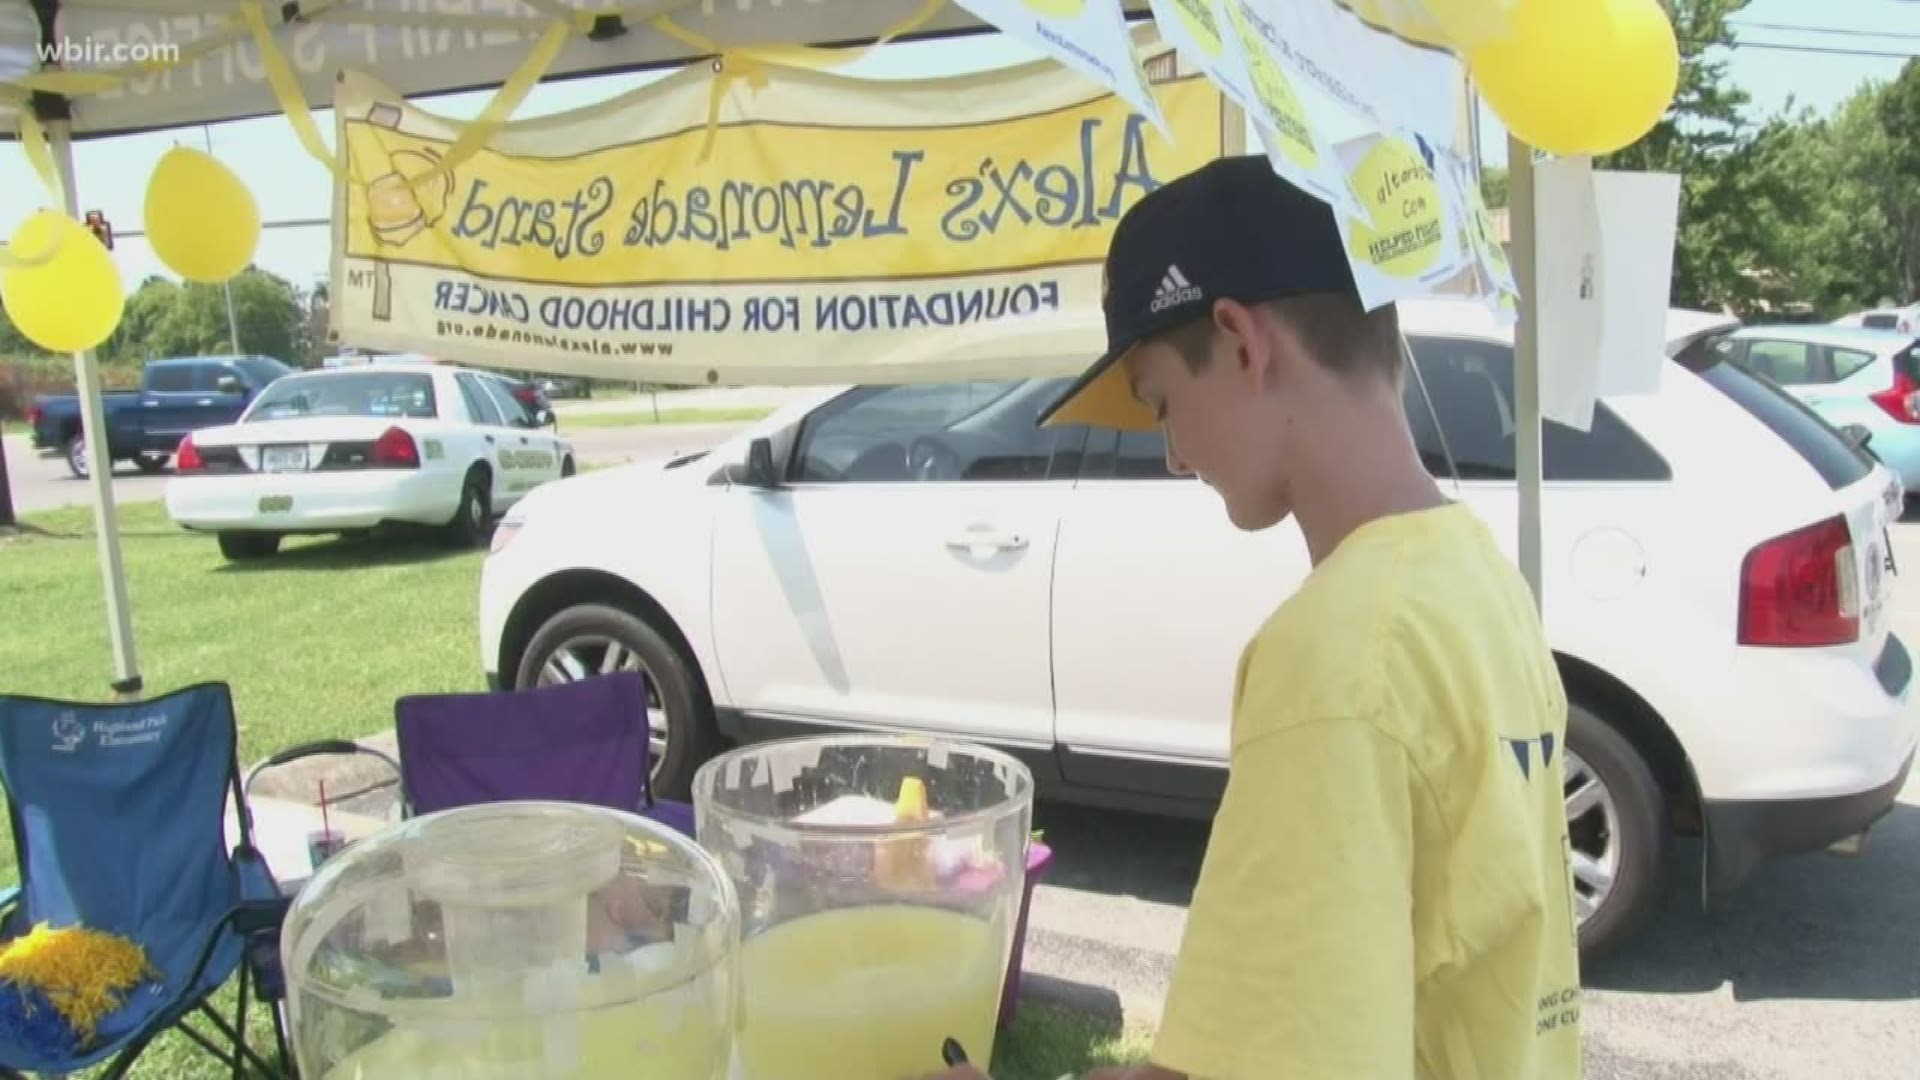 A Loudon County boy is fighting childhood cancer, one cup of lemonade at a time. Drew Myers runs the stand to raise money for Alex's Lemonade Stand - and has raised more than $10,000 over the years to support research, awareness and families dealing with pediatric cancer.